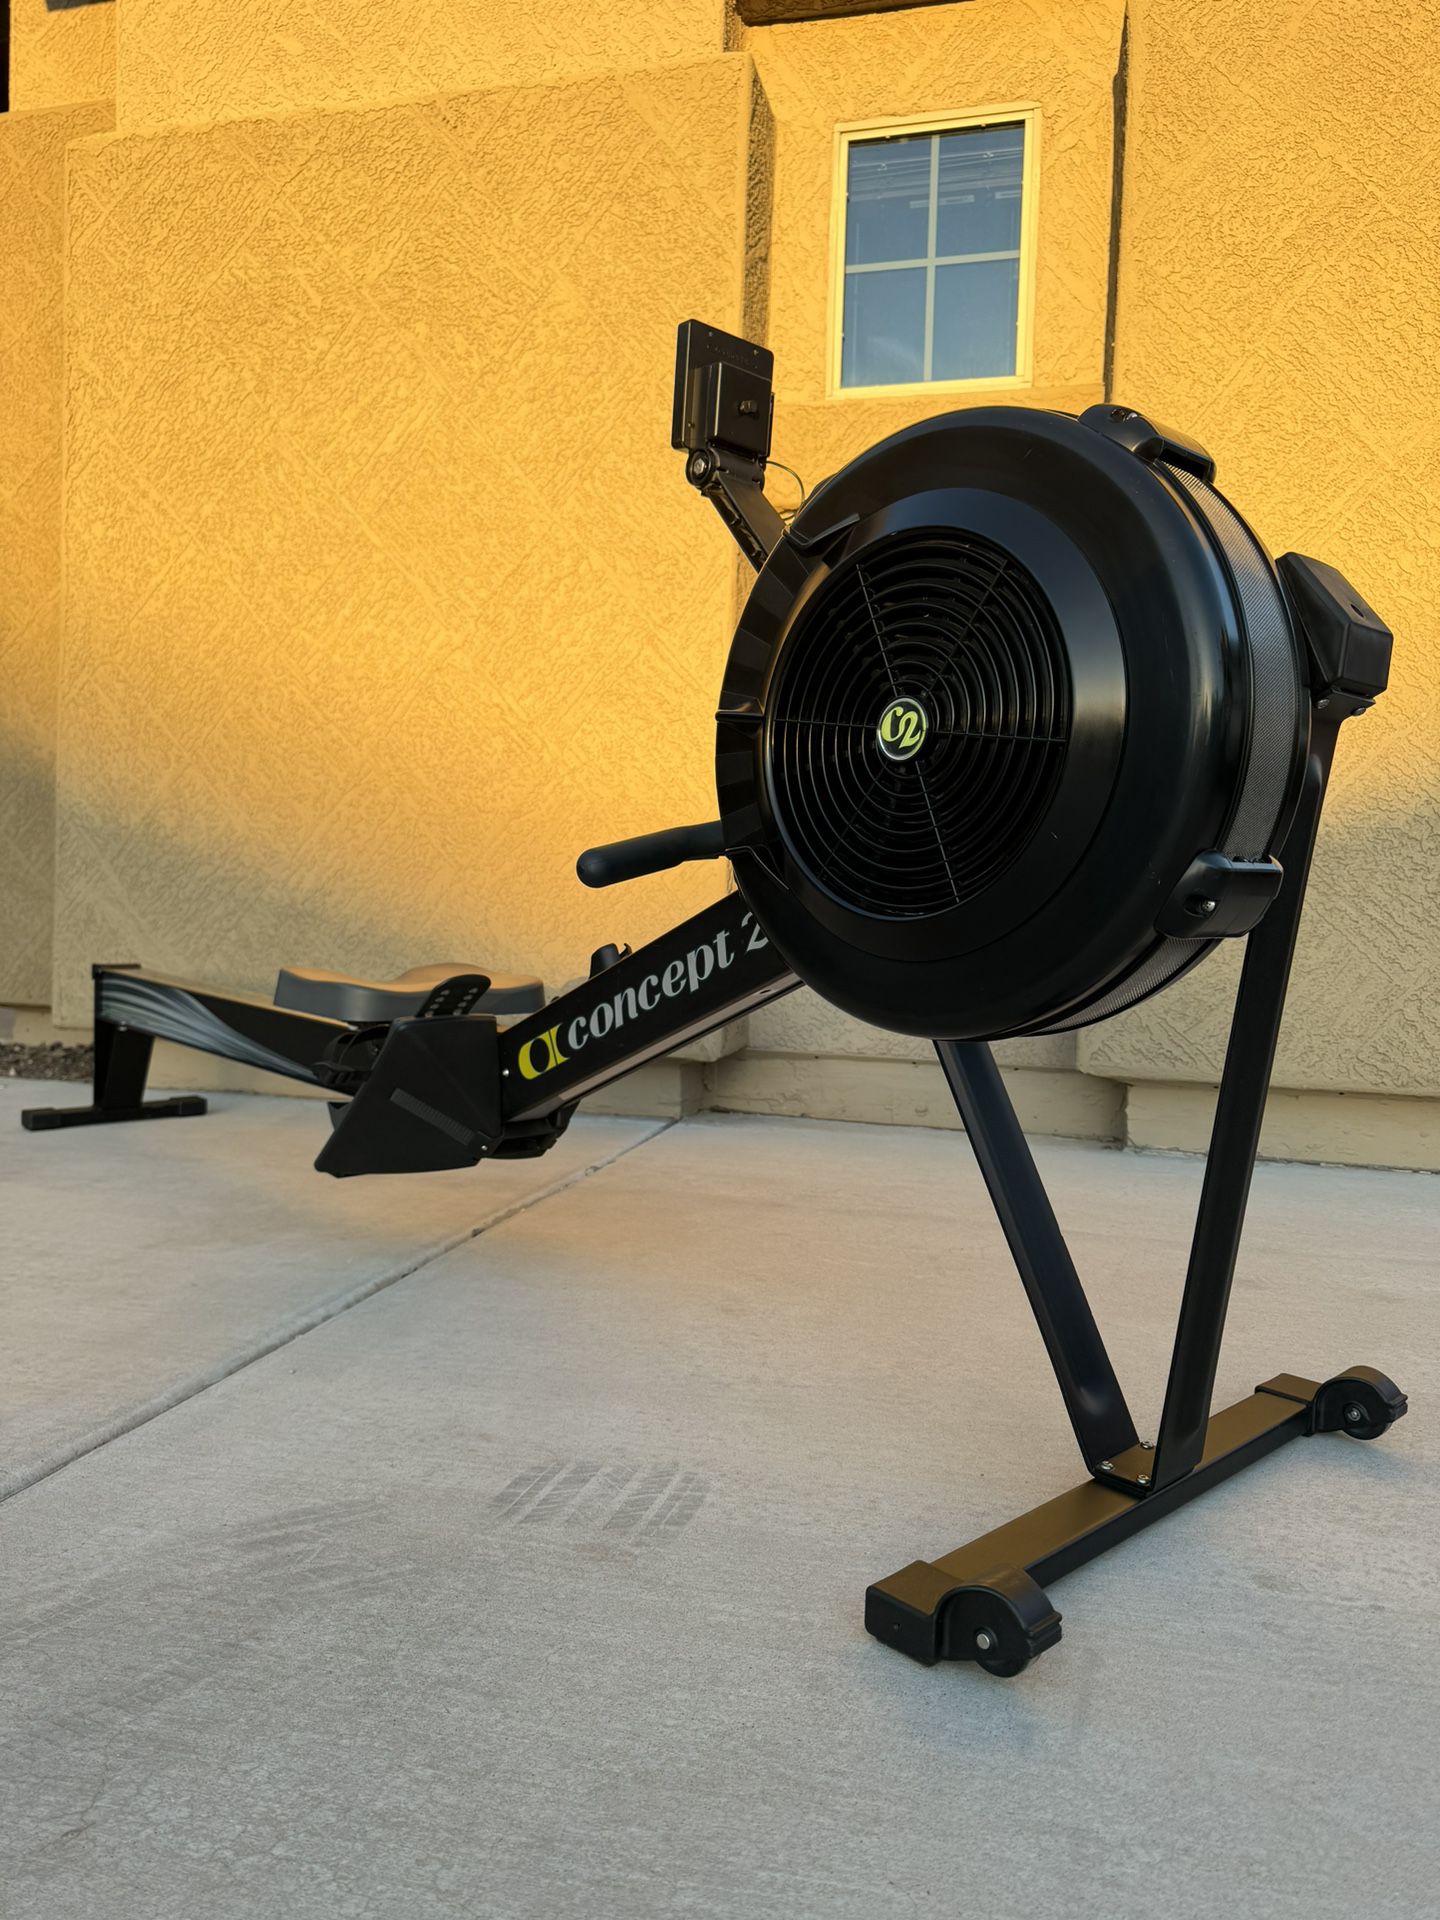 Concept 2 Row Erg Model D Rower With PM5 Monitor - Crossfit Rowing Machine